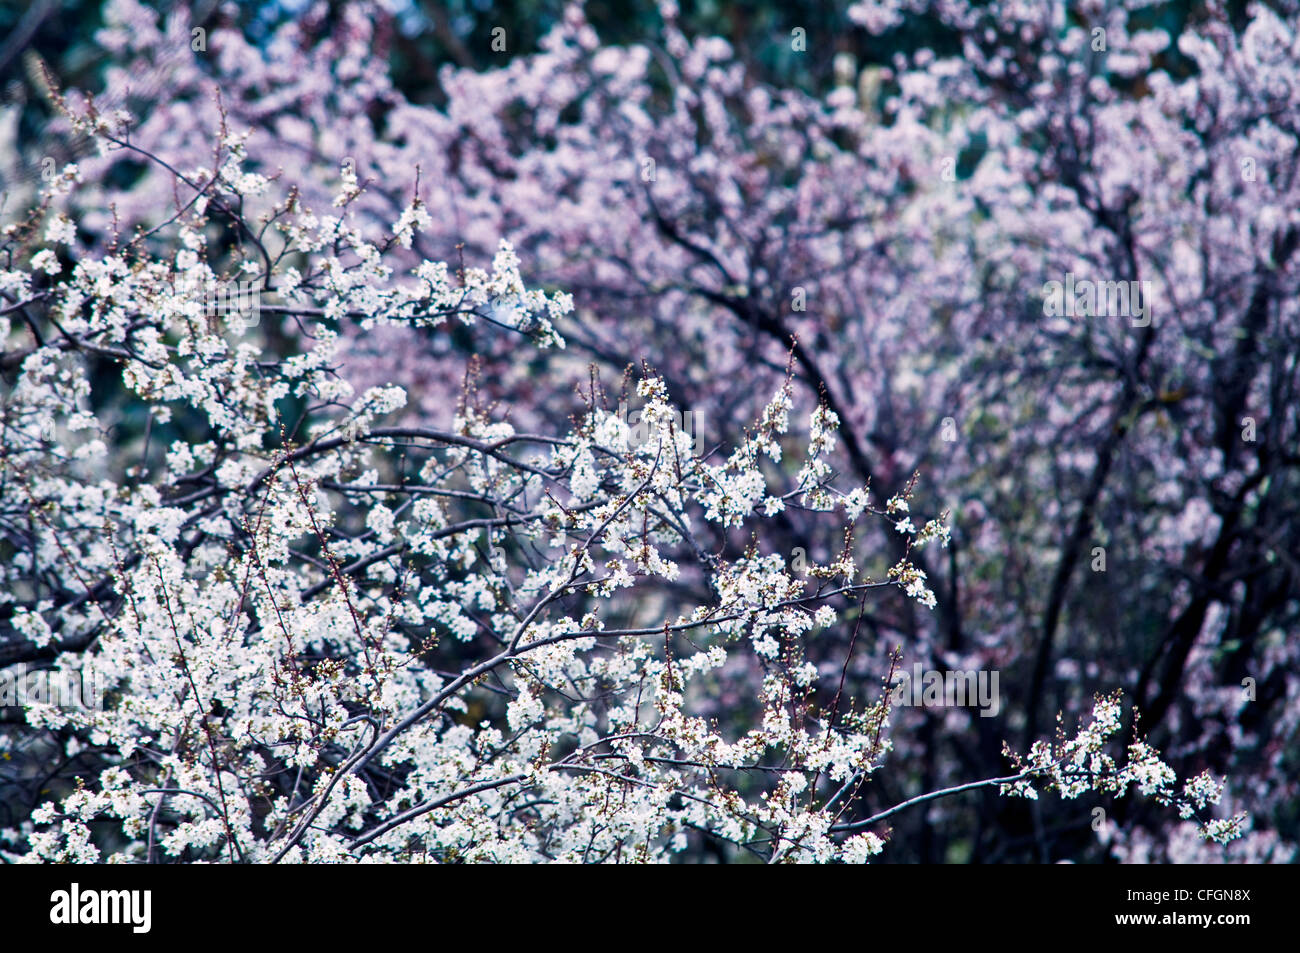 The bright pink translucent blossoms of a prunus plum tree in flower. Stock Photo